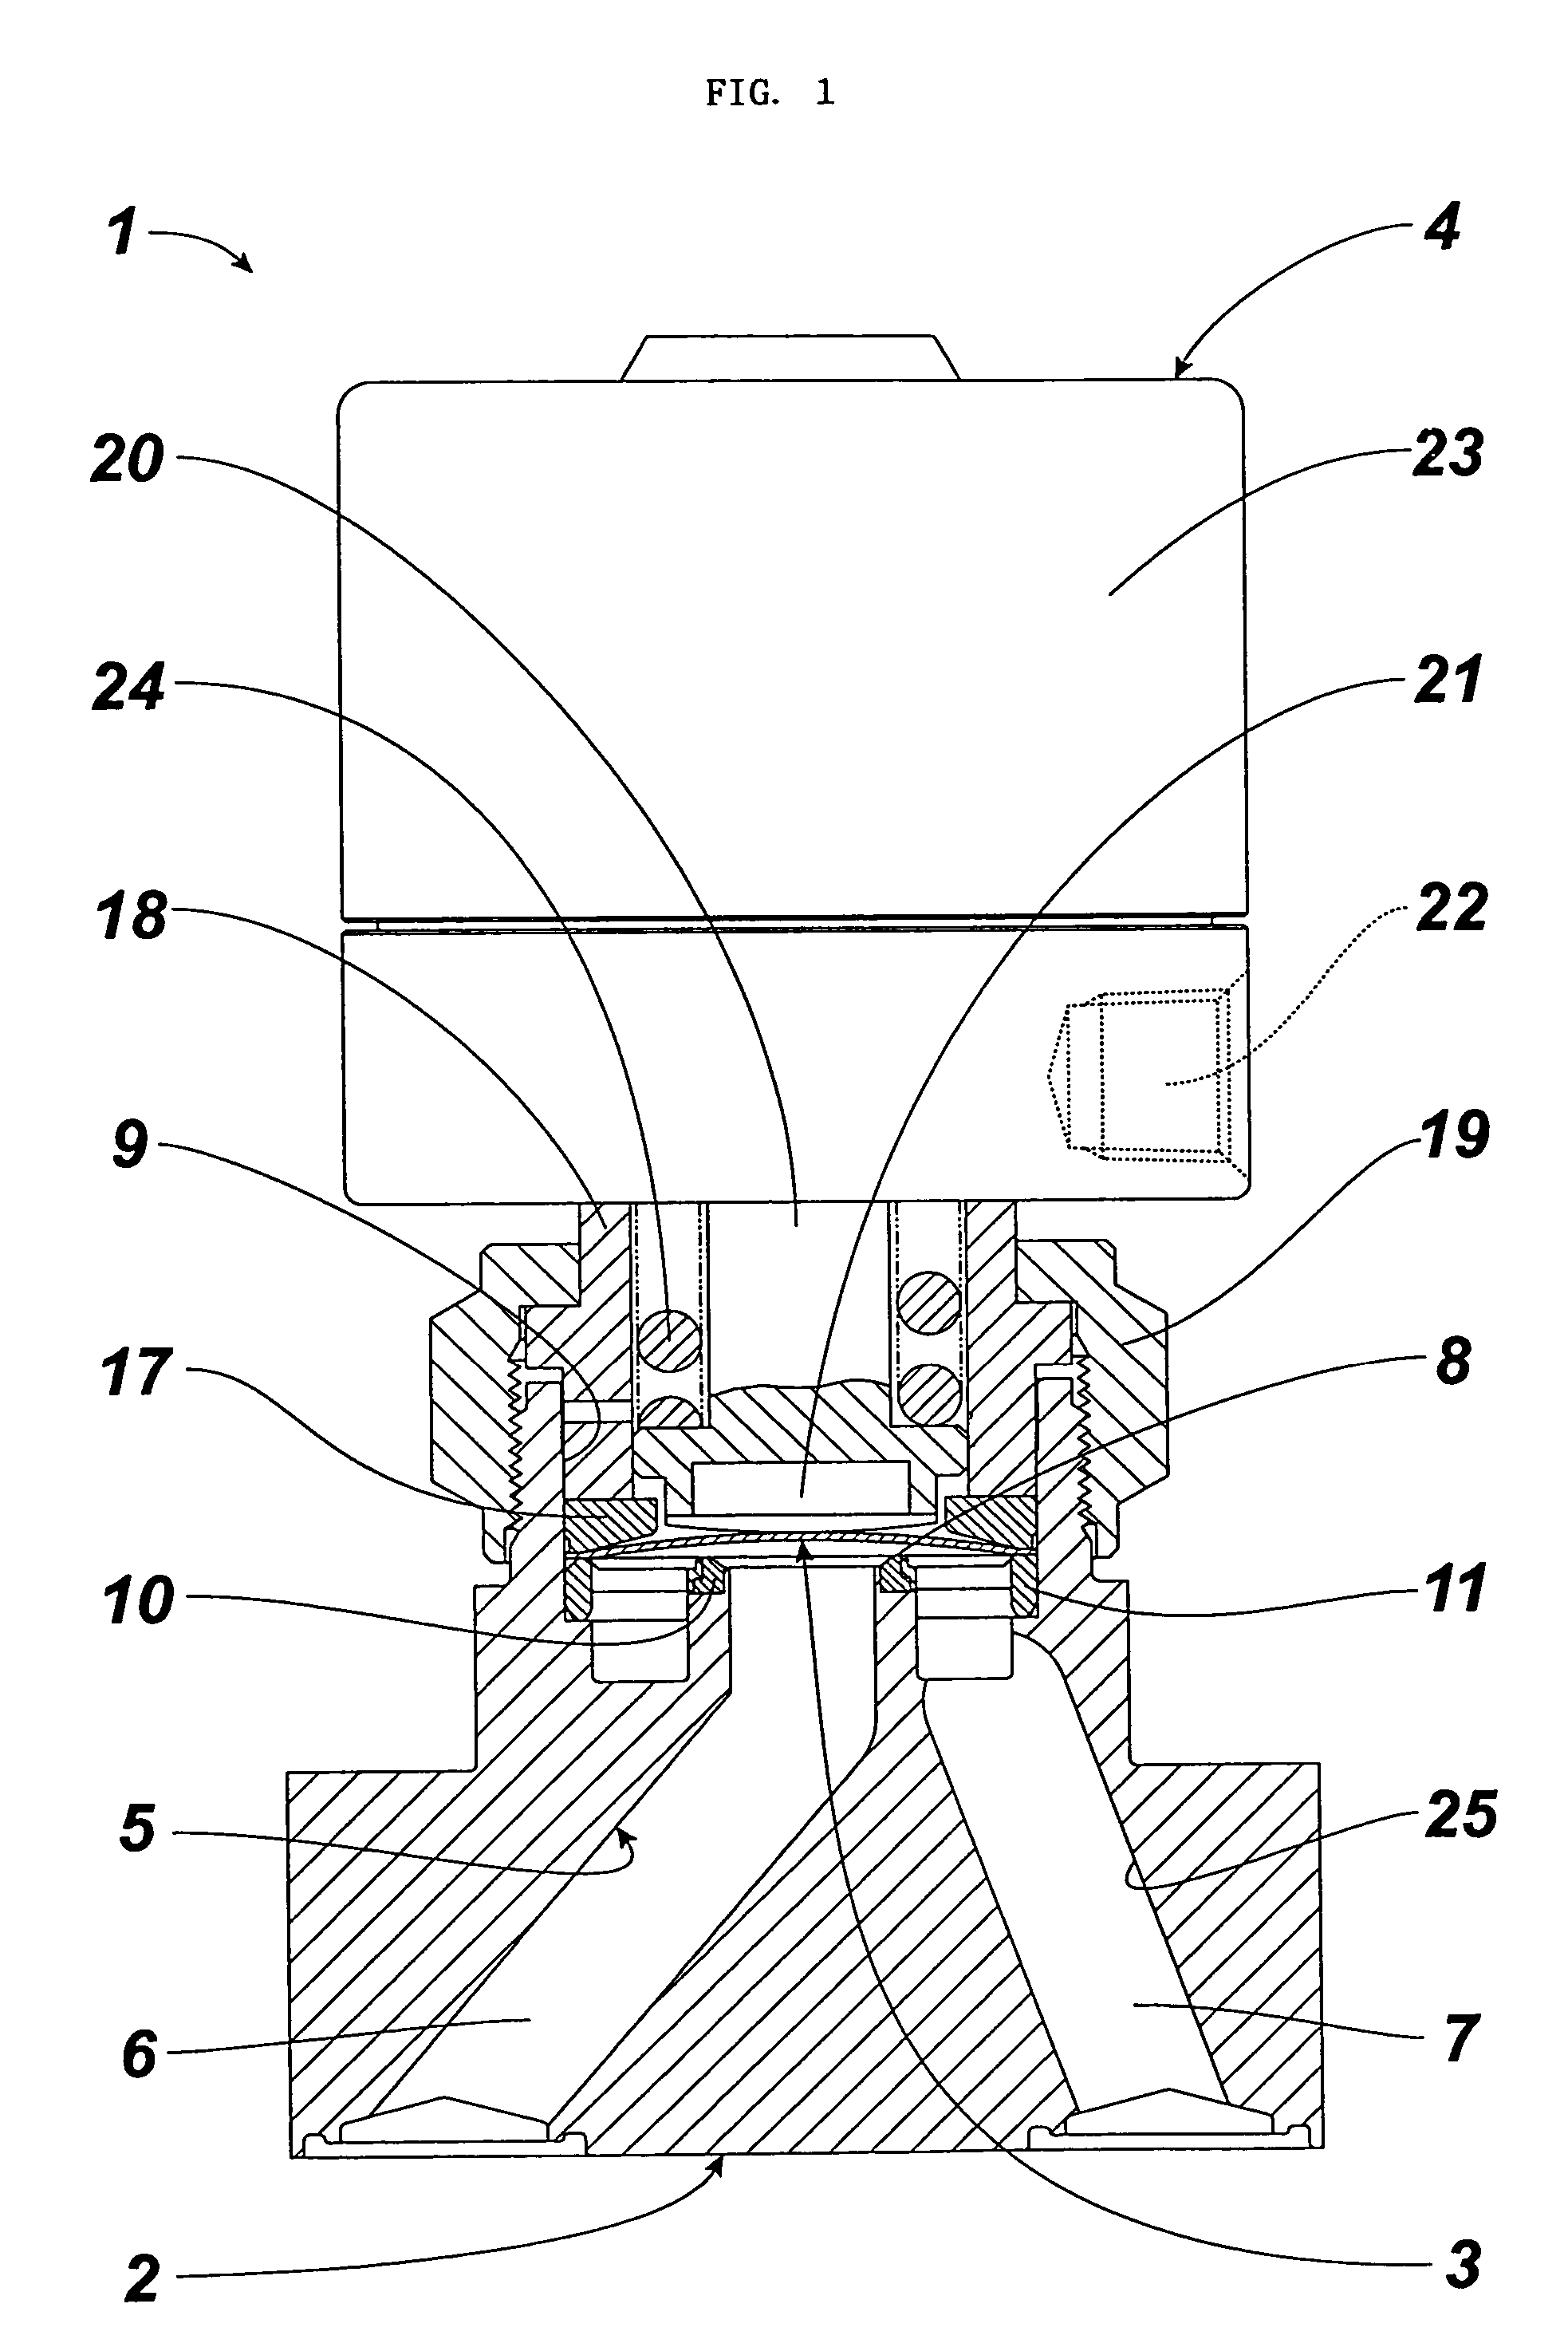 Diaphragm valve for the vacuum exhaustion system